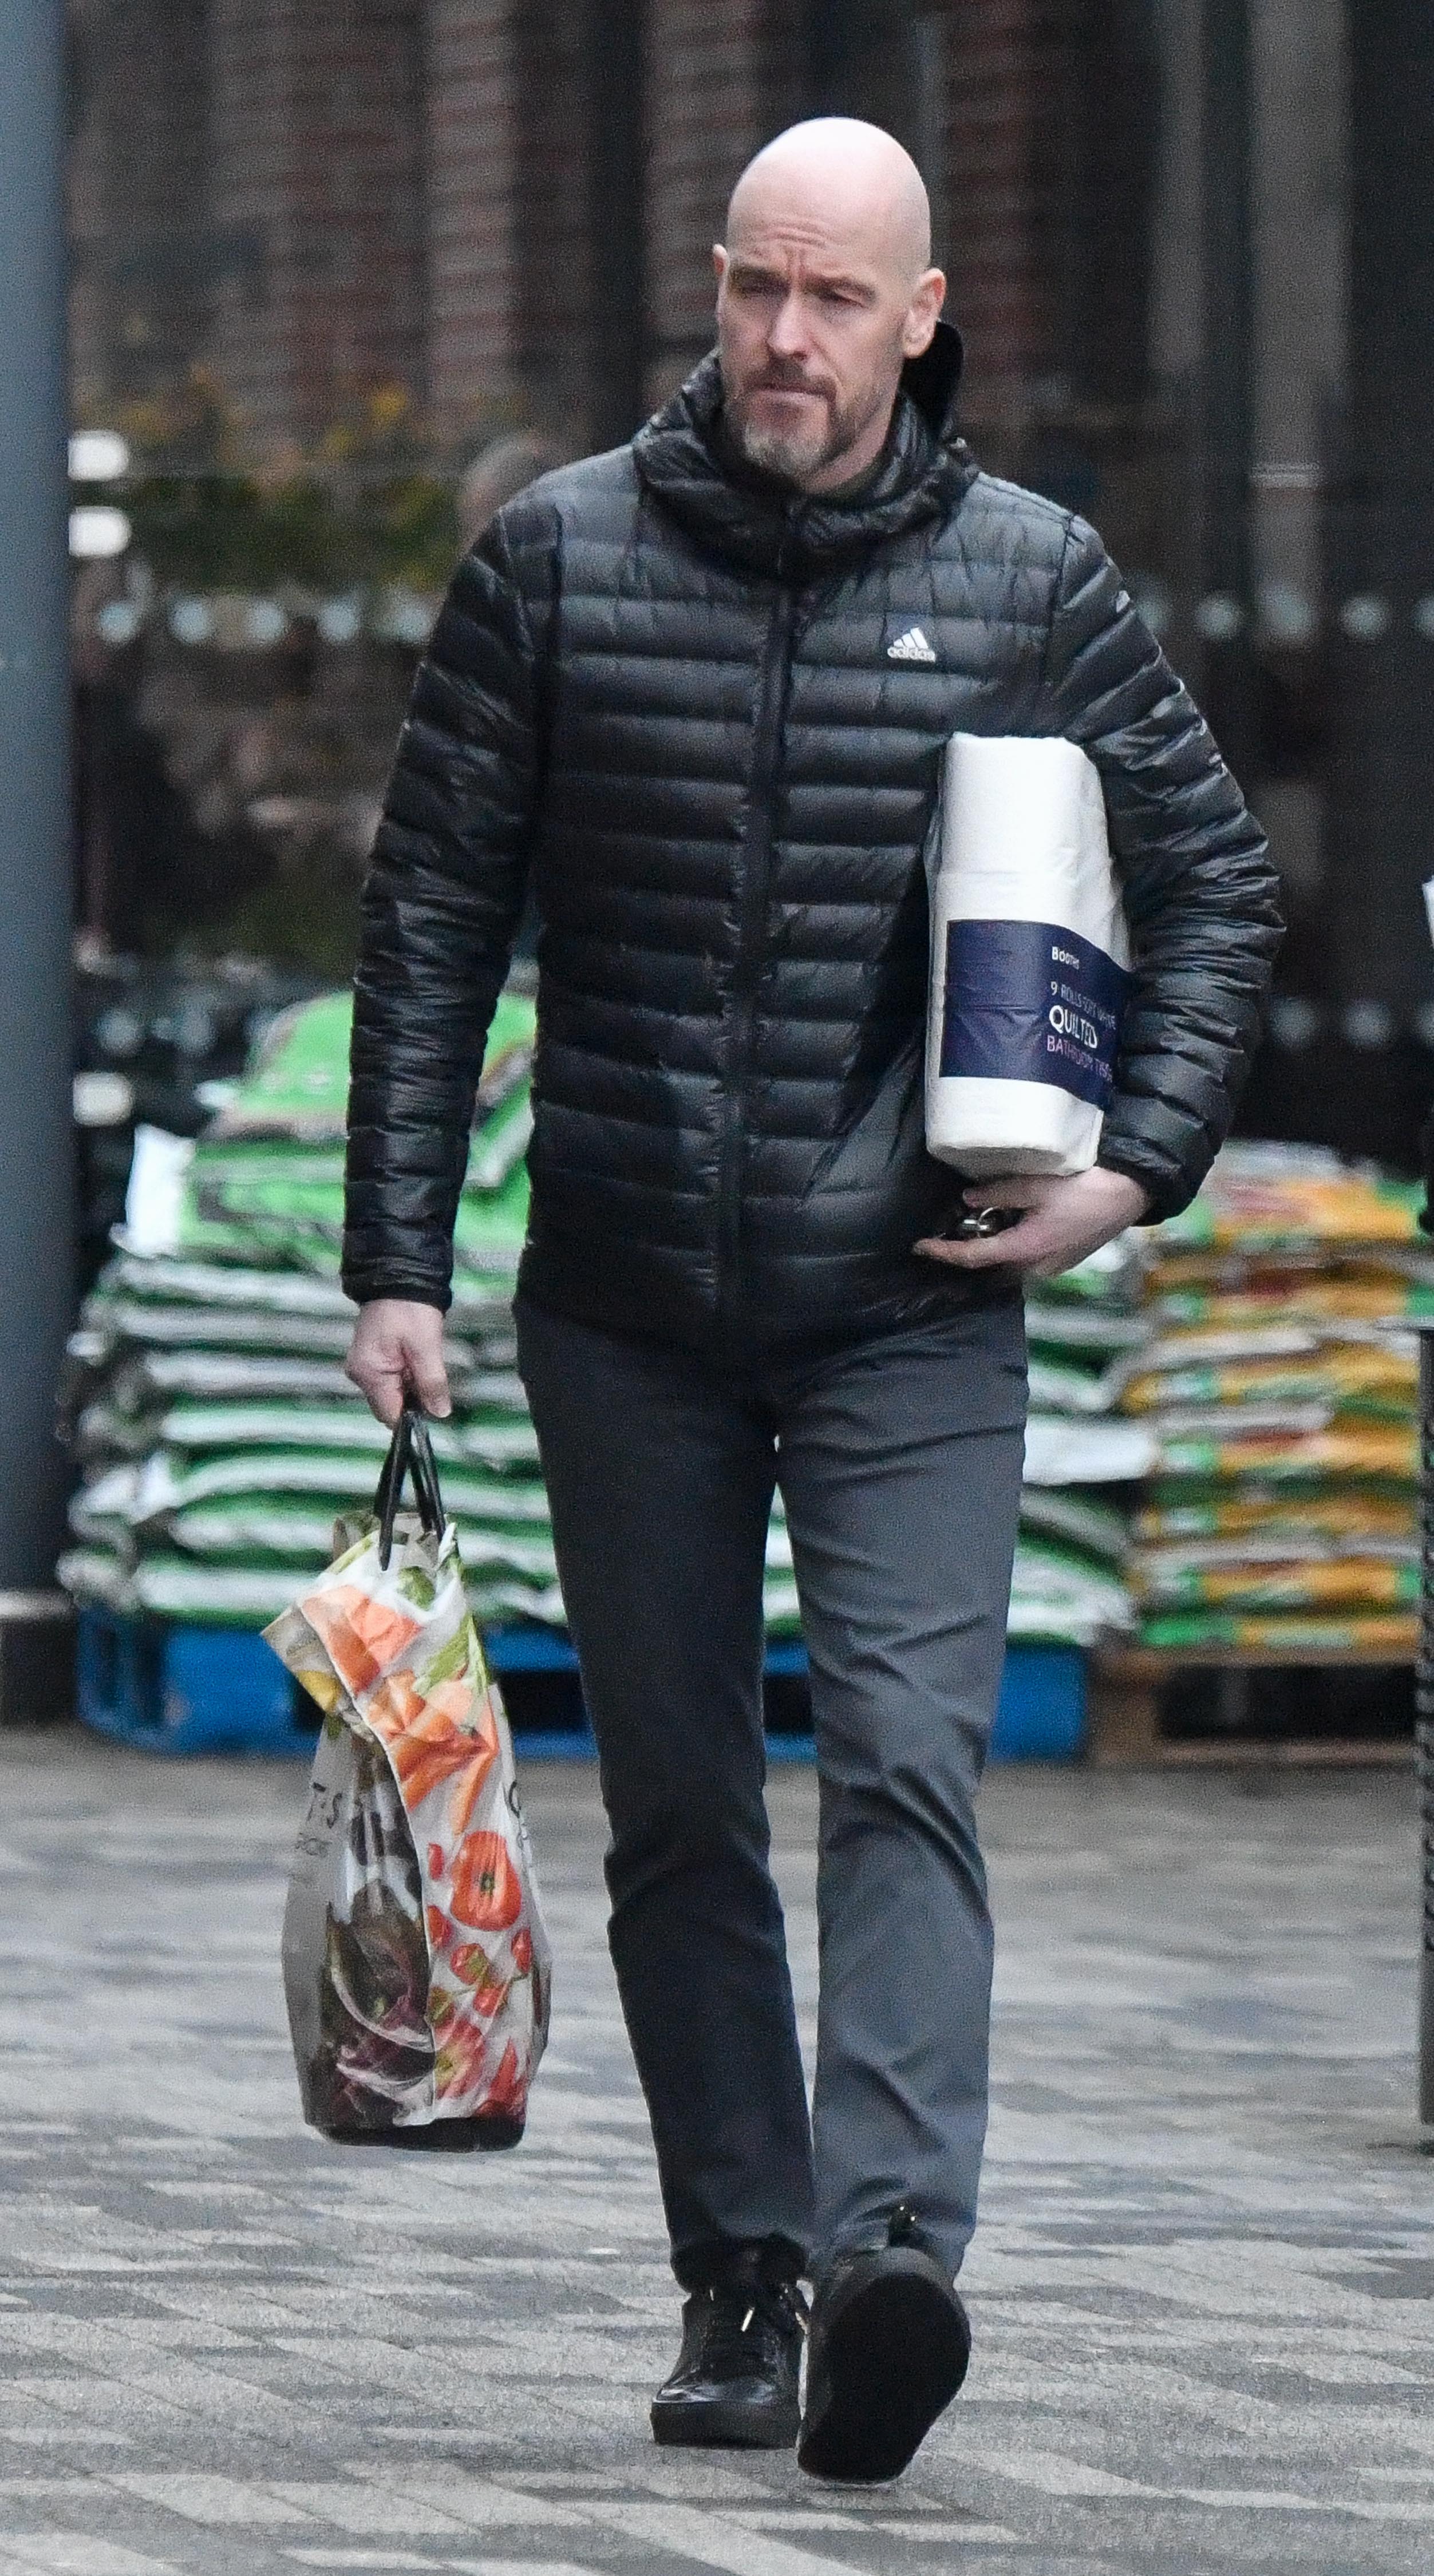 Erik ten Hag was spotted with toilet roll whilst out shopping